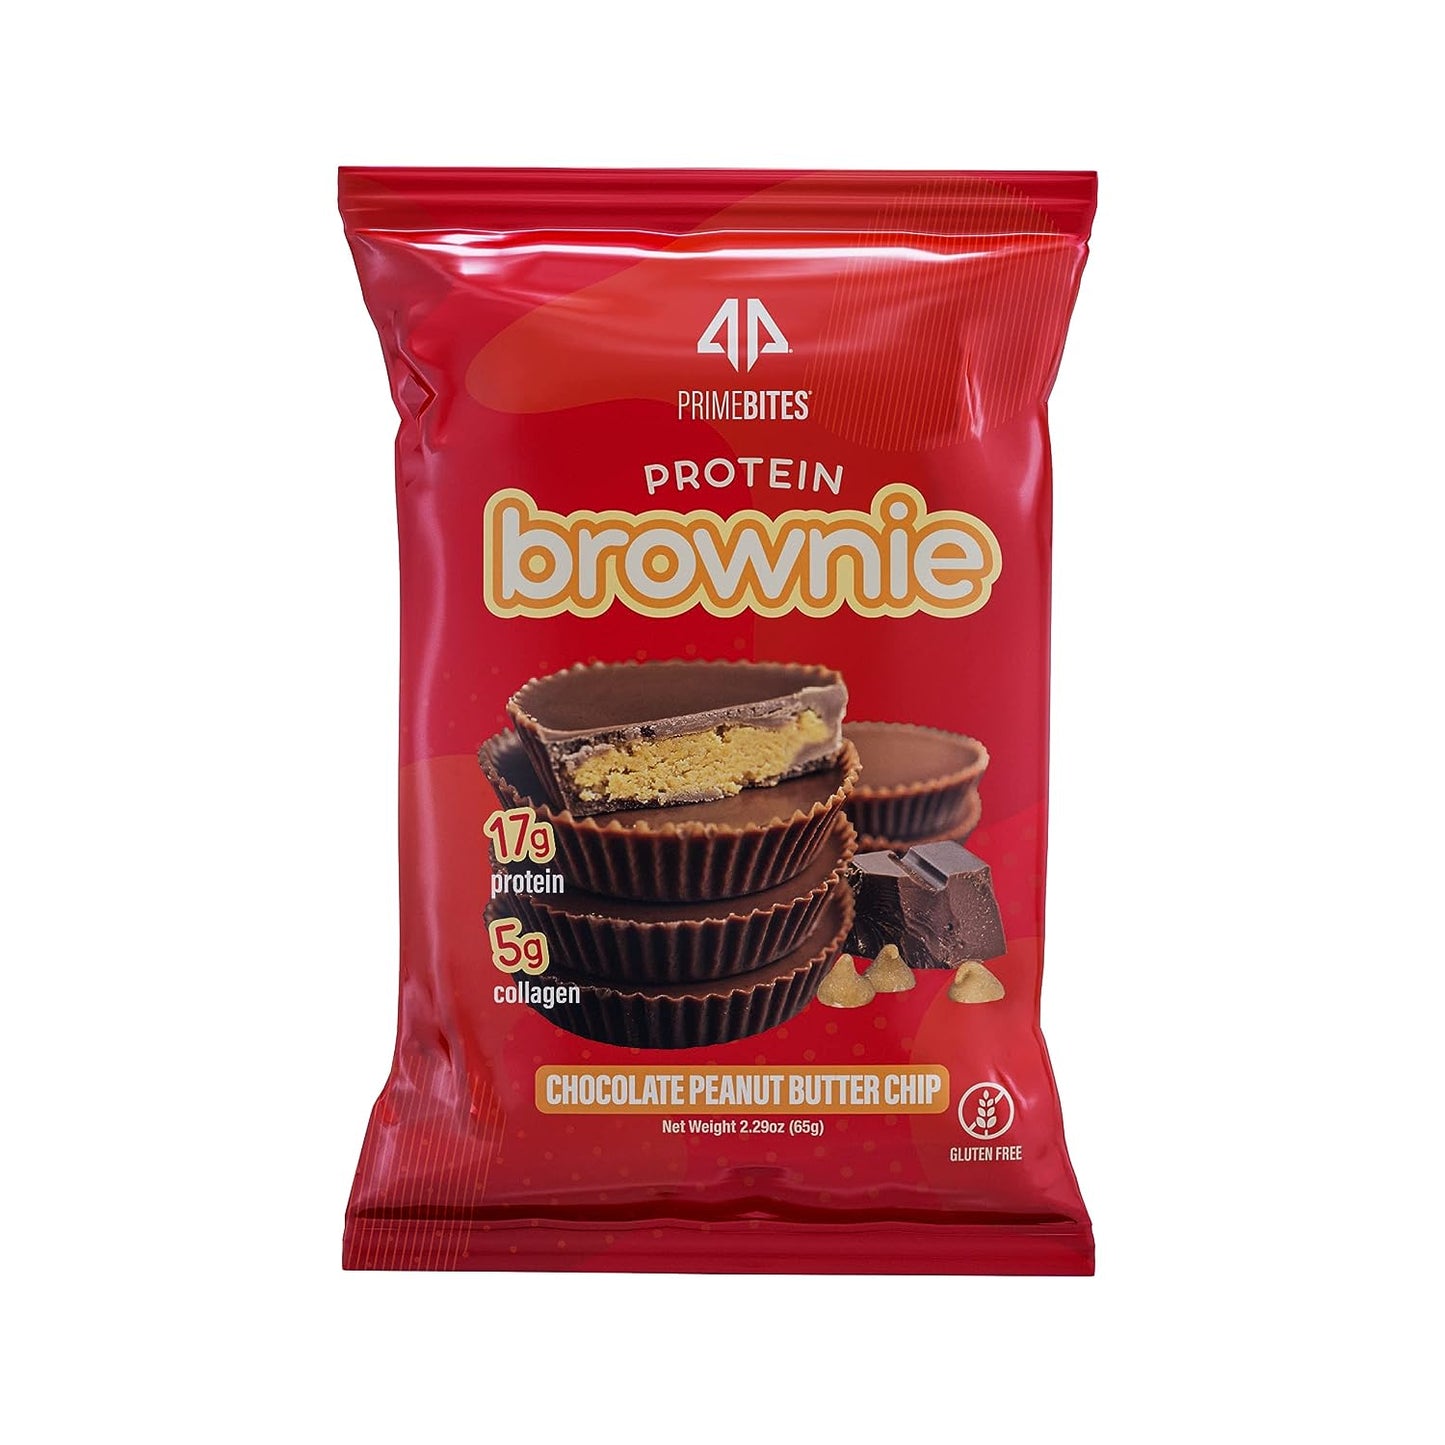 Alpha Prime - Protein Brownie Chocolate Peanut Butter Chip 1 Pc